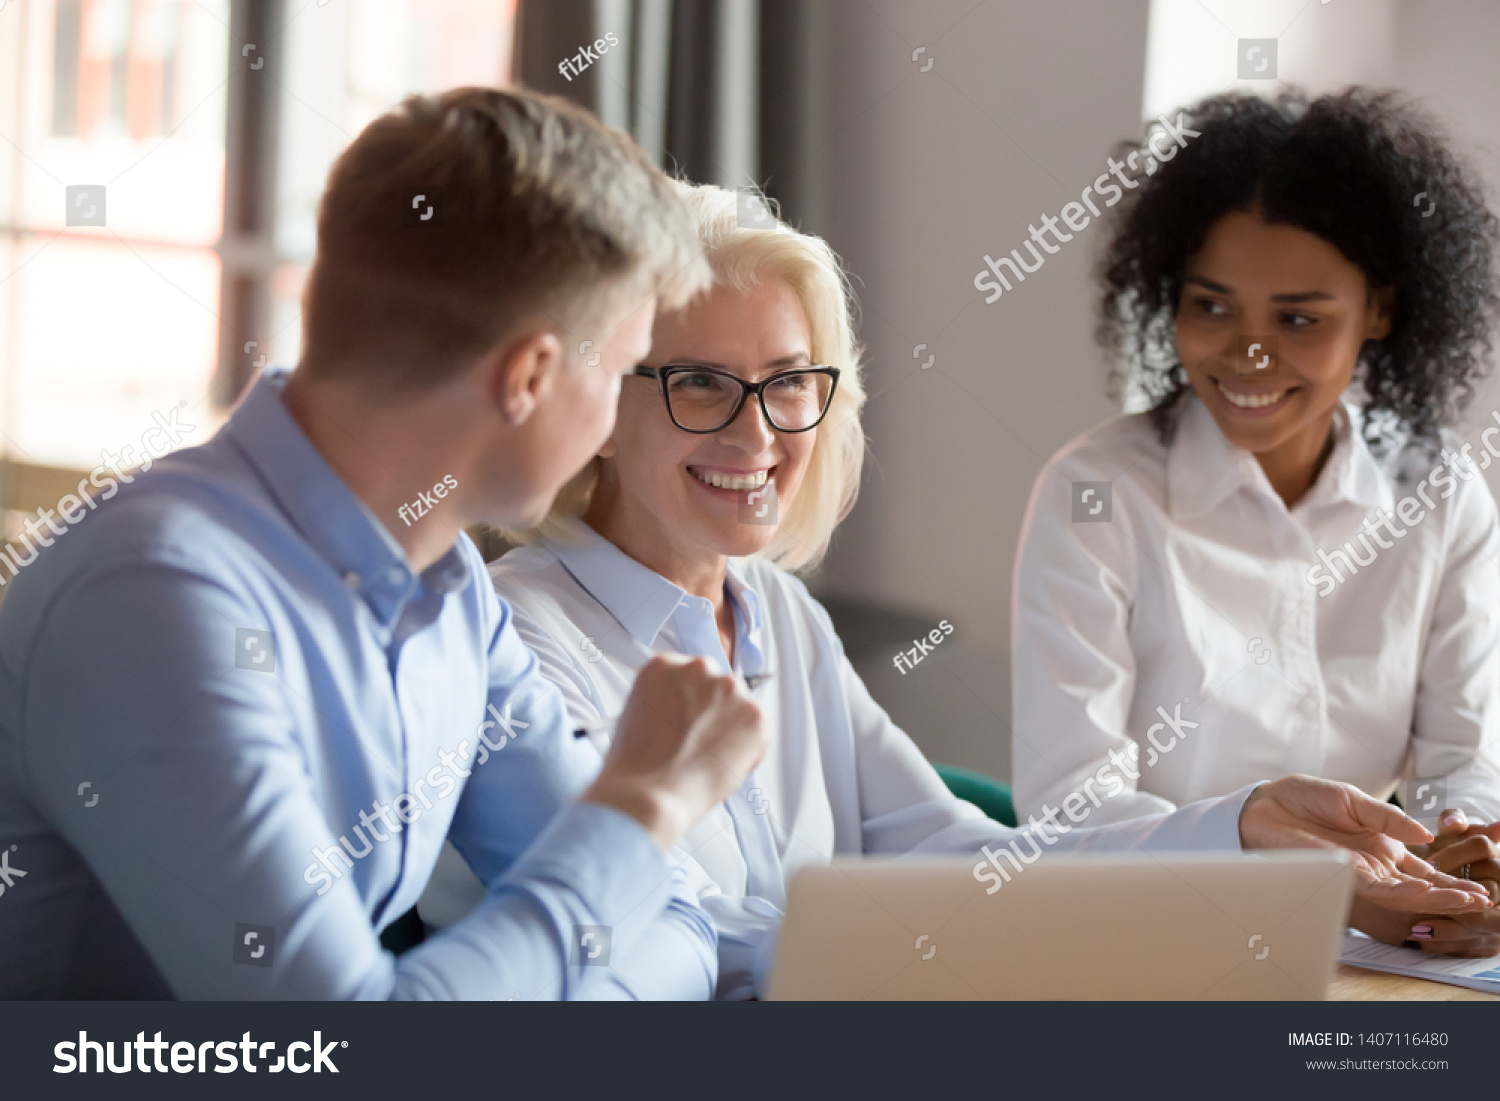 Smiling Happy Mature Older Female Mentor Stock Photo Edit Now